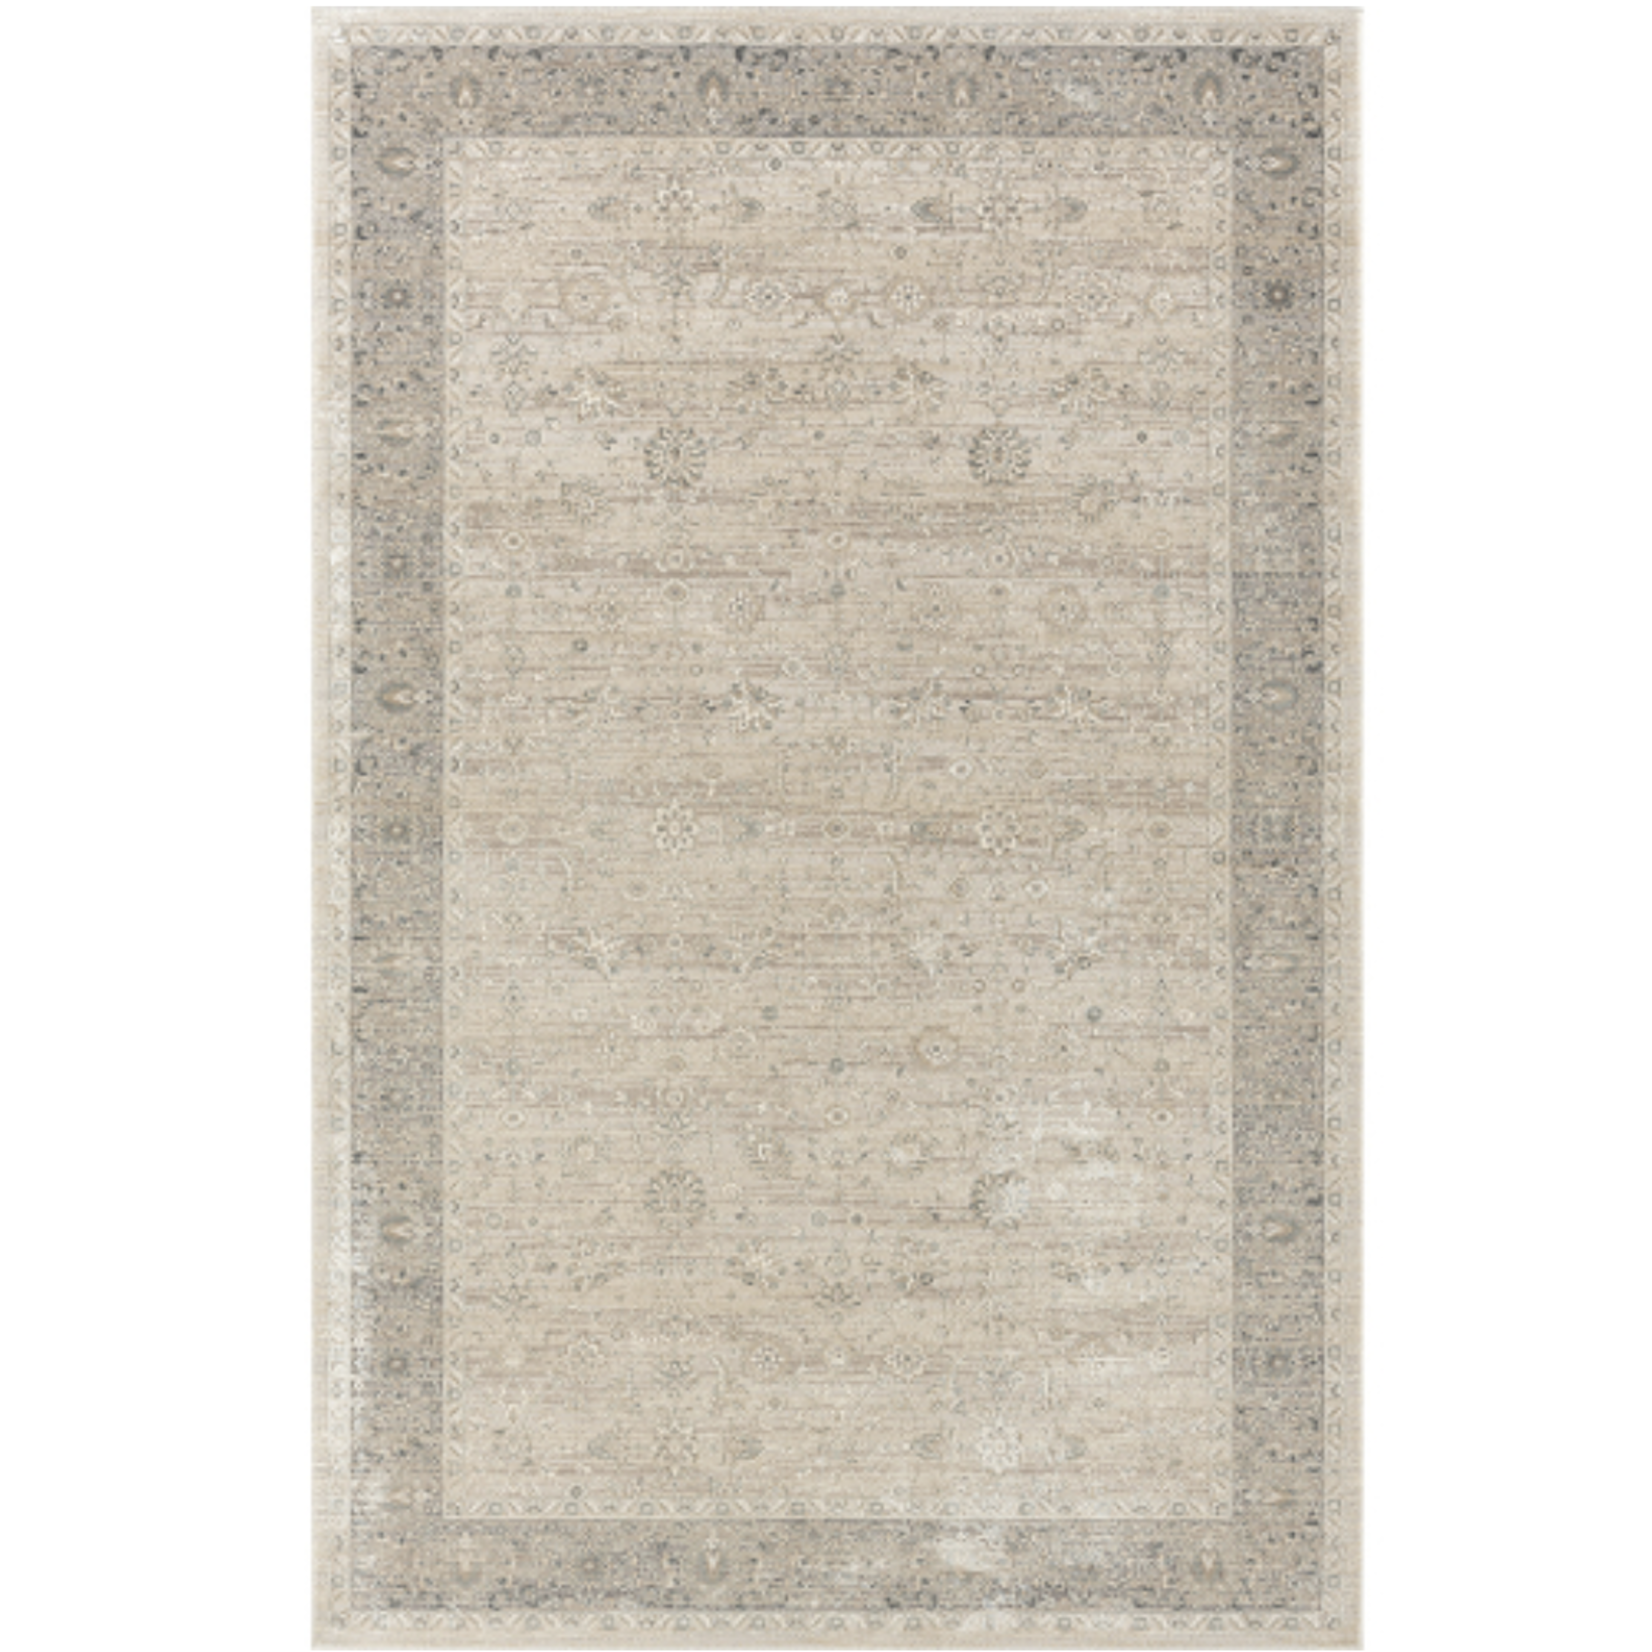 Outside The Box 7' 9" x 9' 9" Cheshire Viscose & Acrylic Blend Area Rug In Gray / Beige - 82129